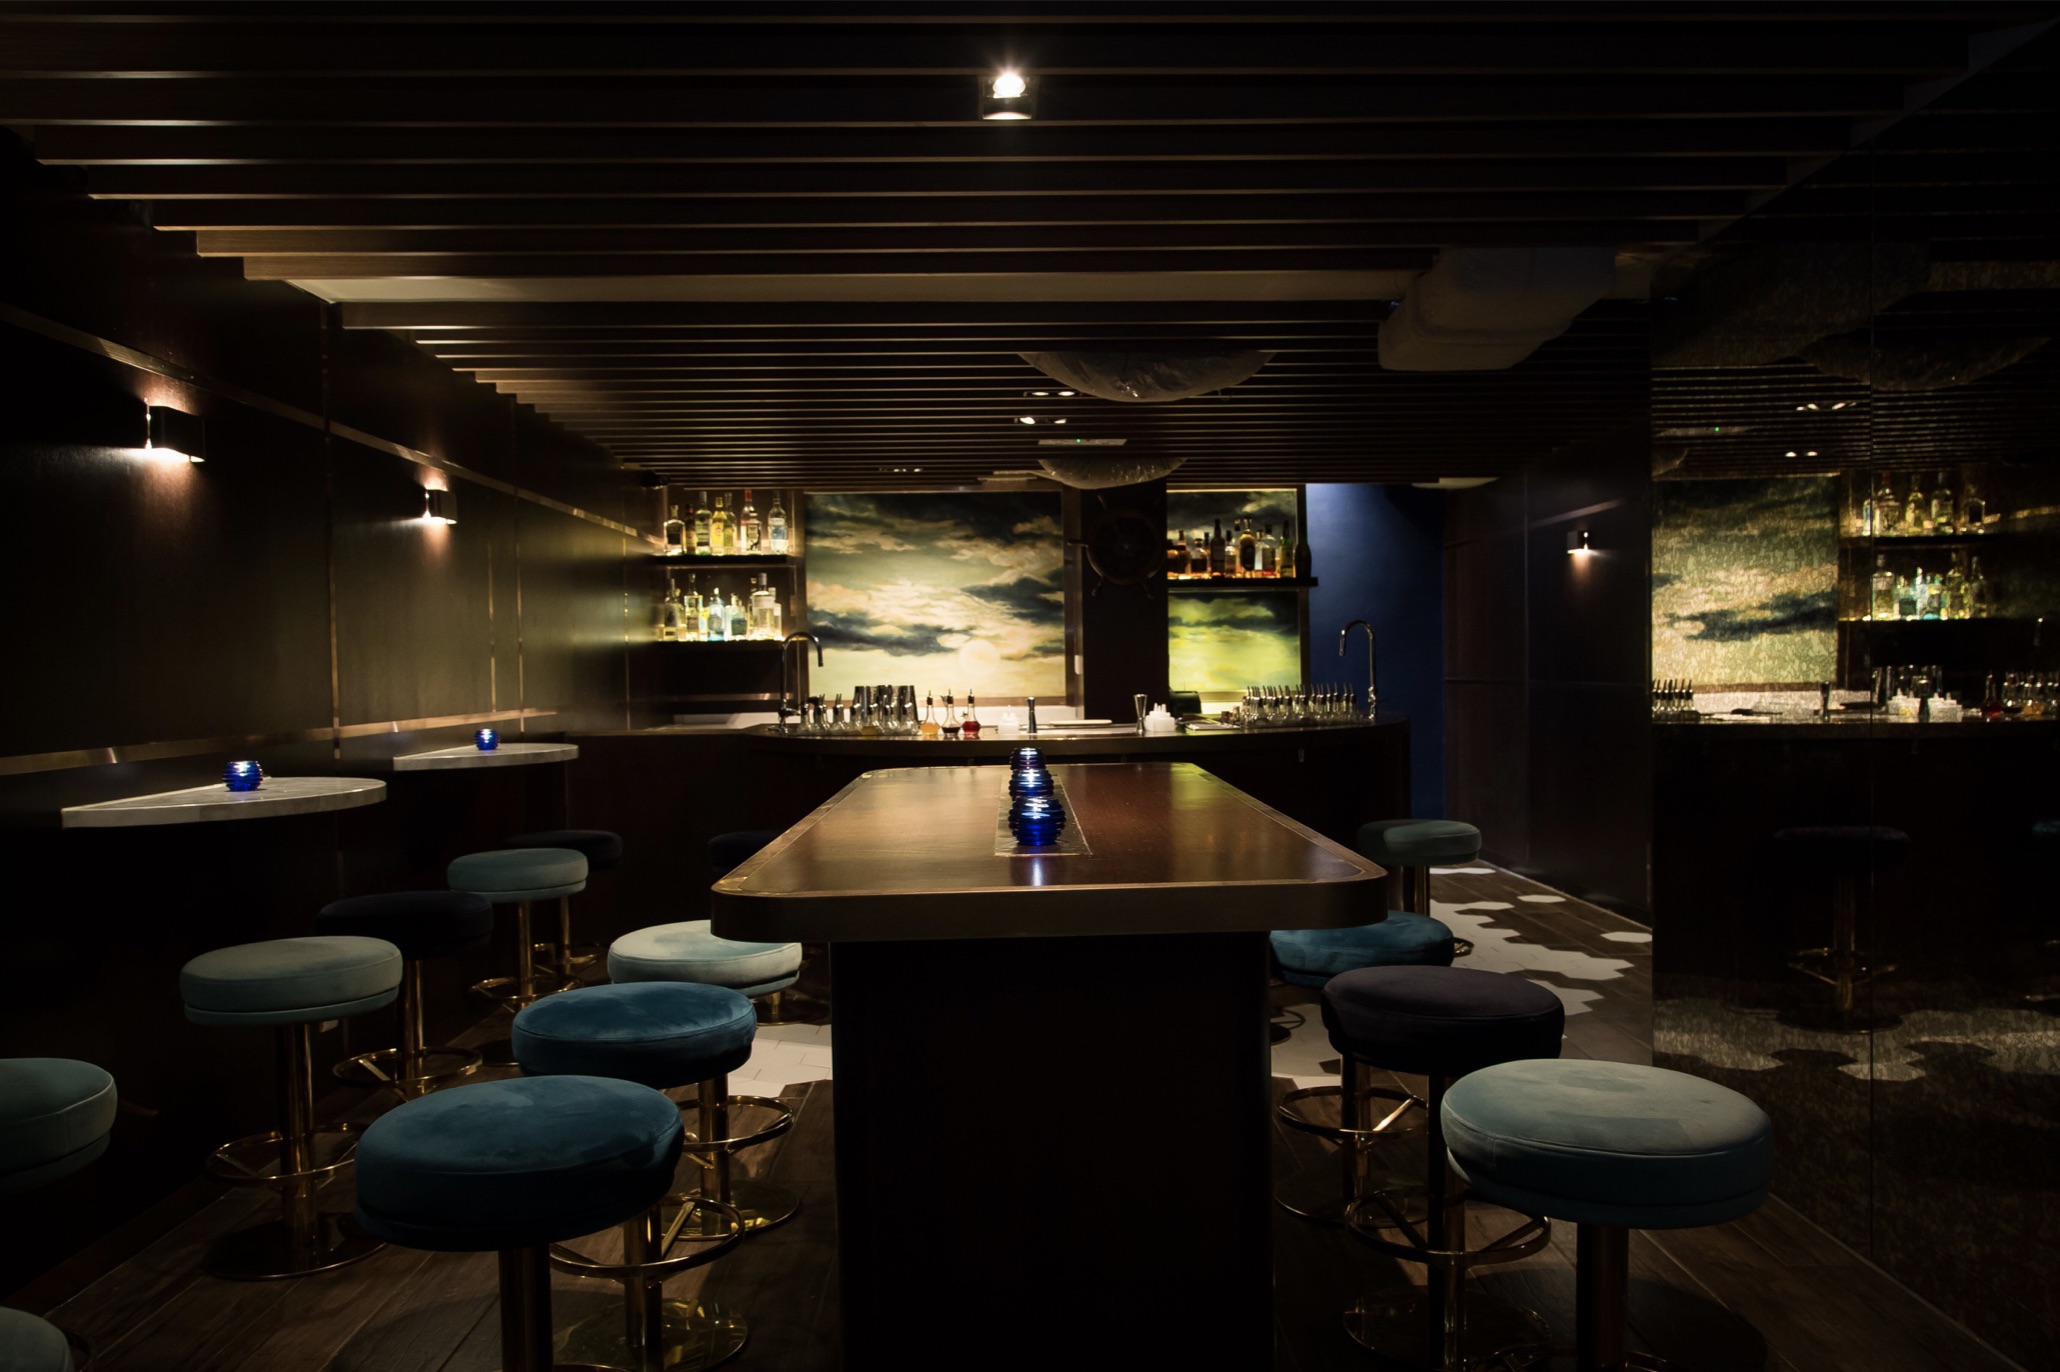 The inside of The Sea, the new sister bar of Hemingway-themed bar The Old Man. Photo via Forks and Spoons.